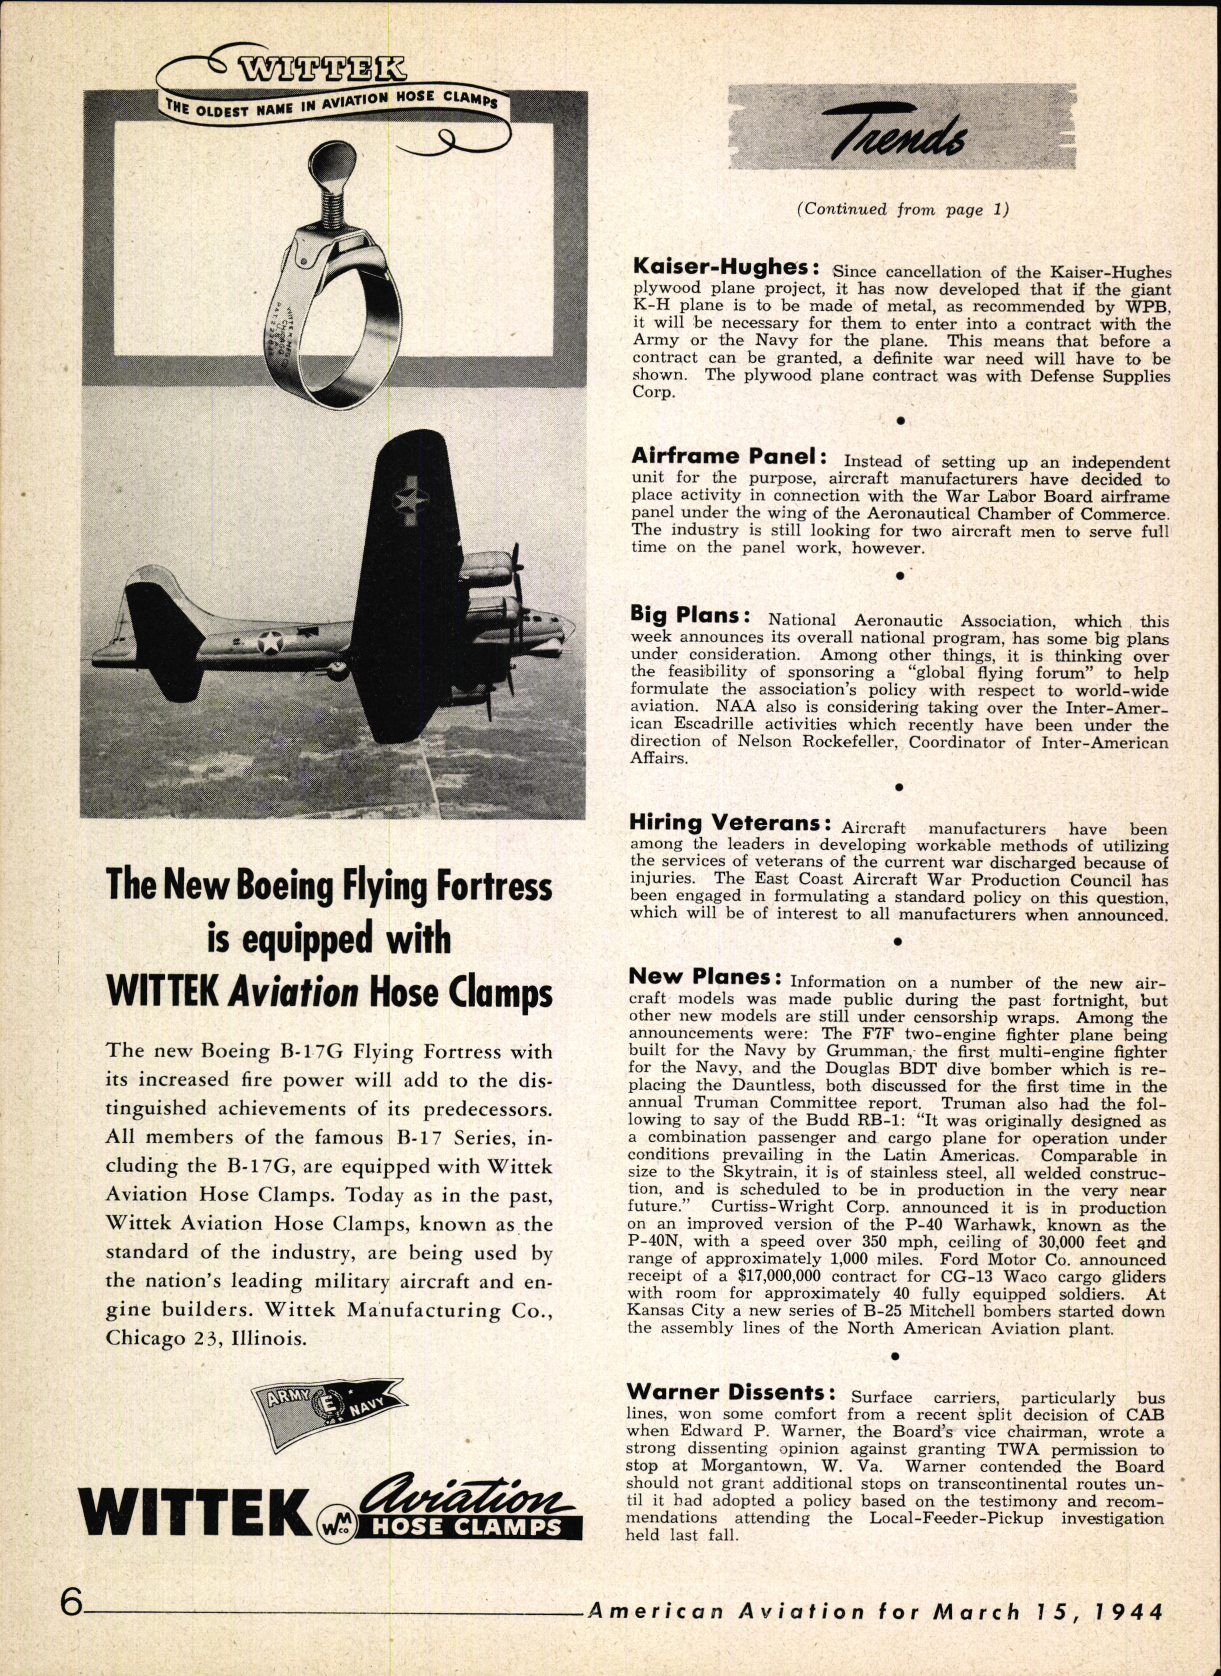 Sample page 6 from AirCorps Library document: American Aviation Magazine - Volume 7 - No. 20